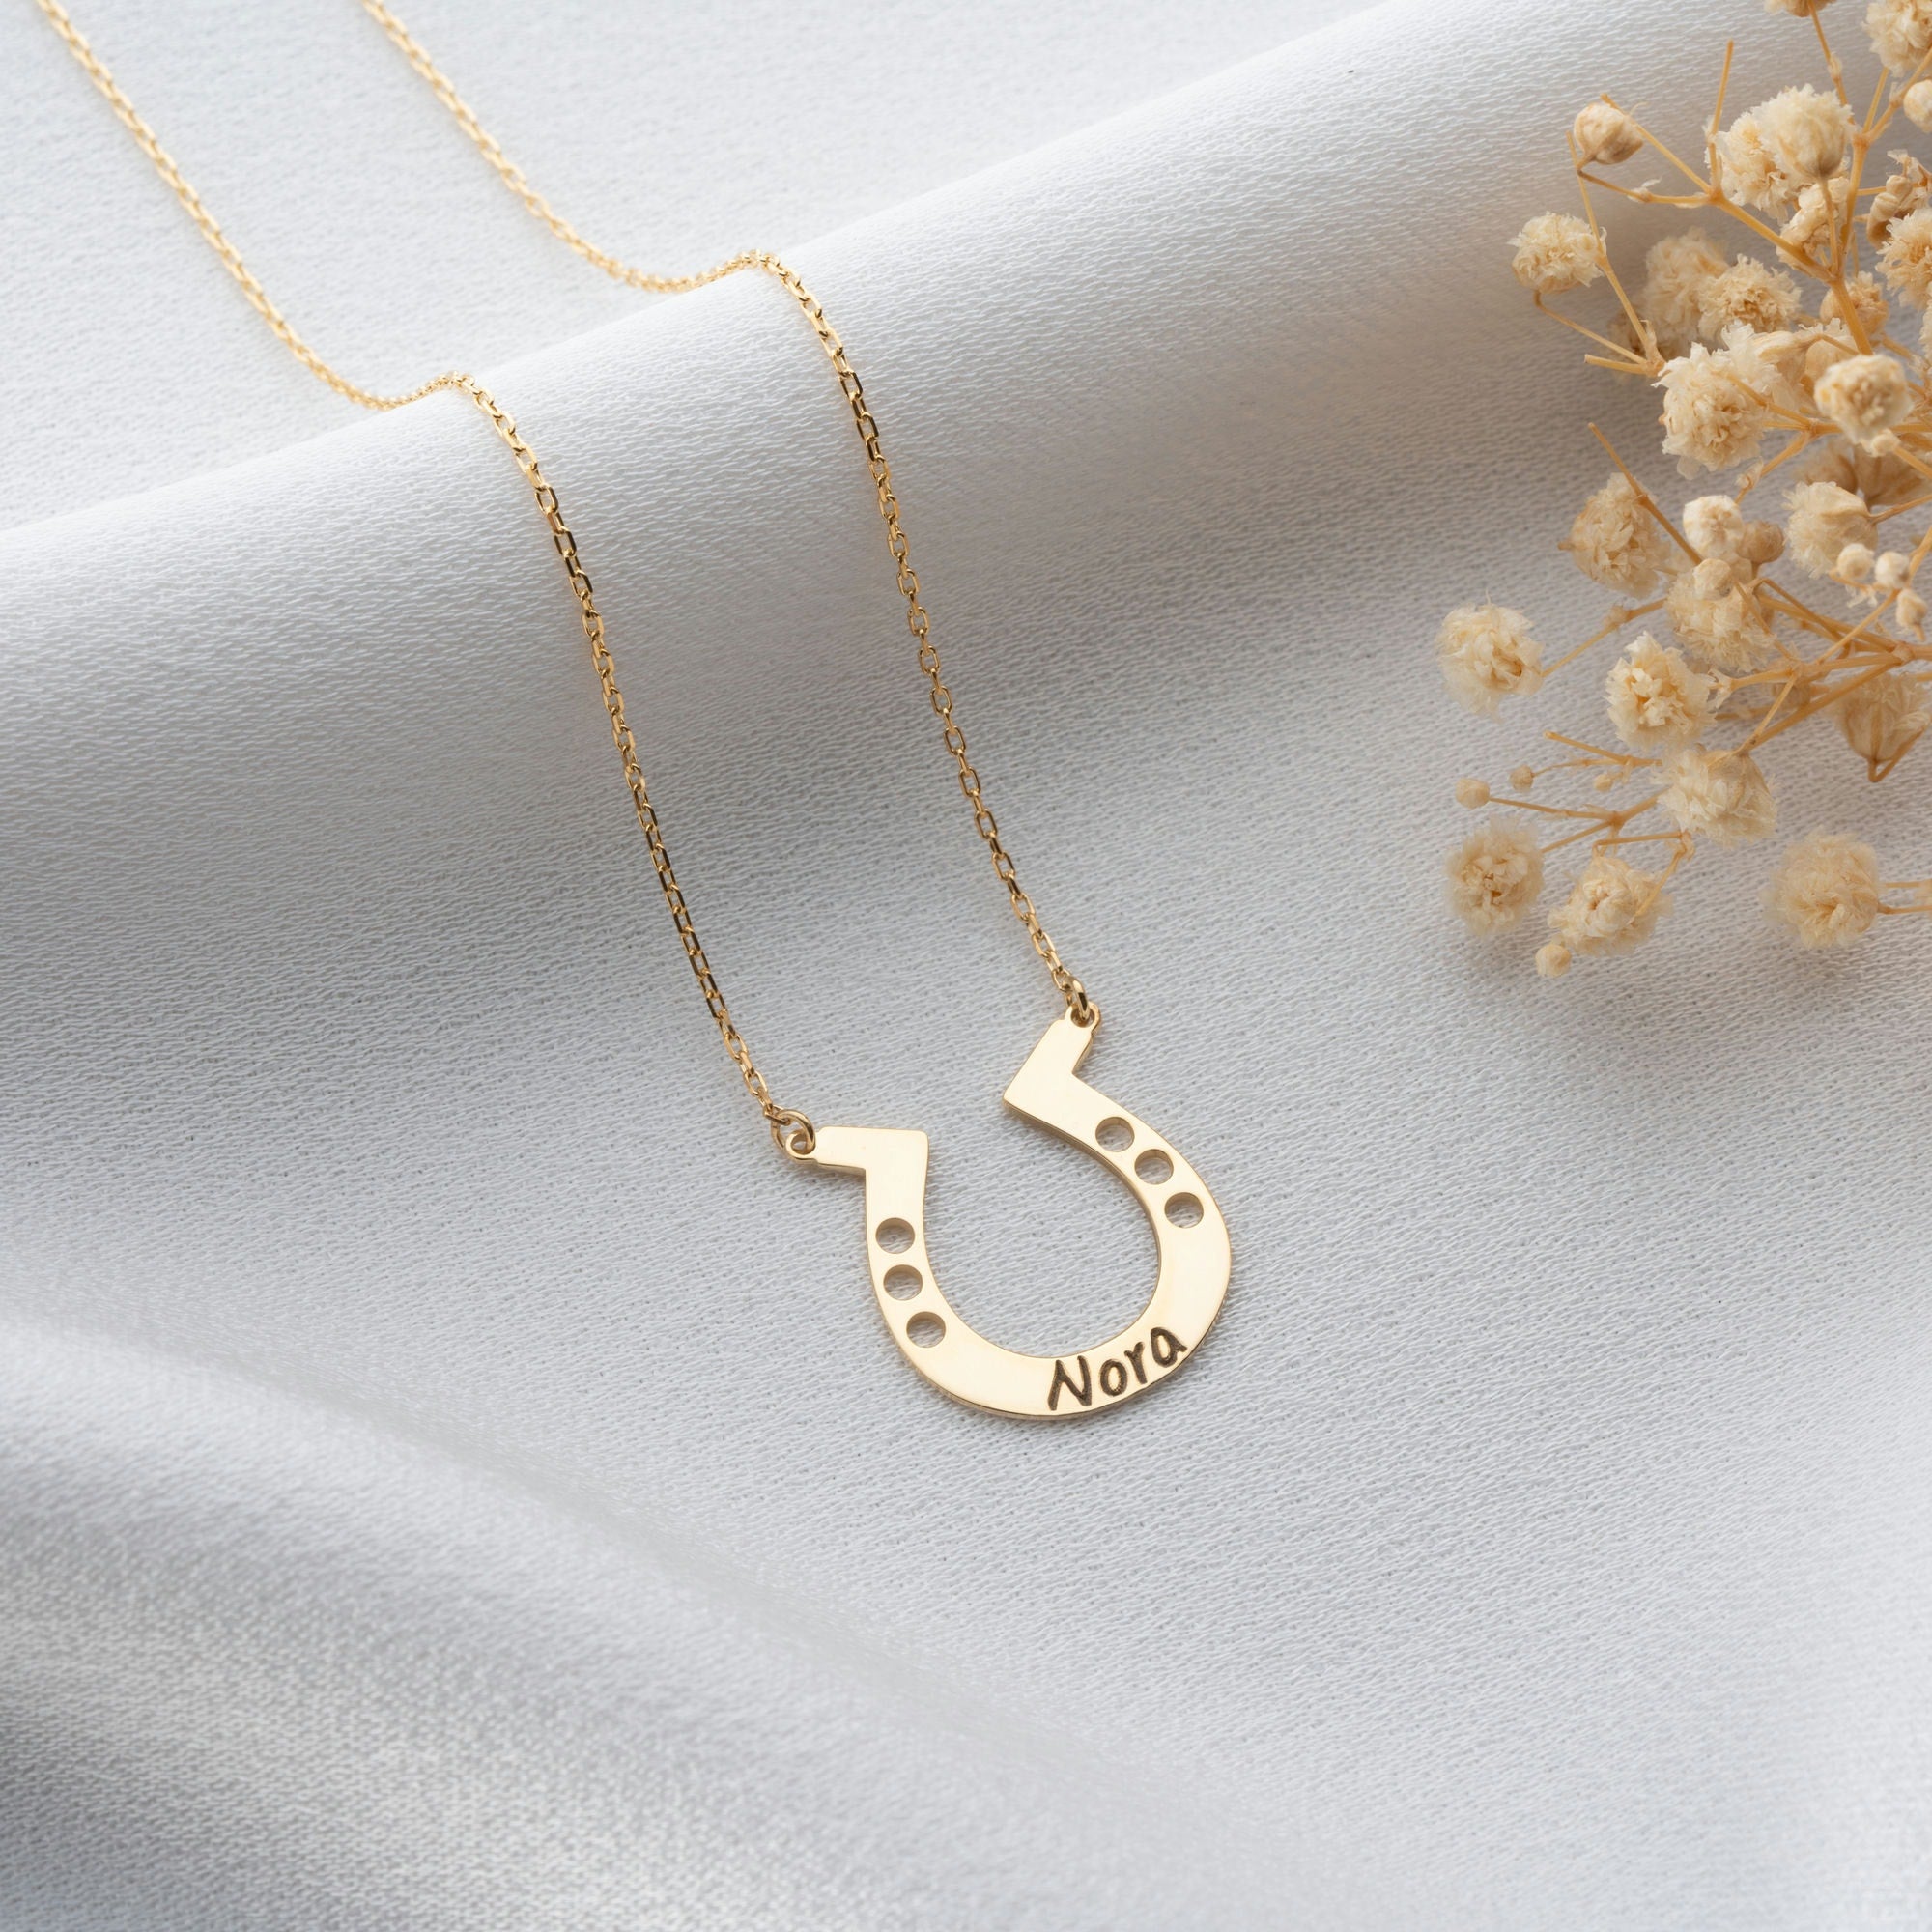 Horseshoe Necklace With Name In Sterling Silver